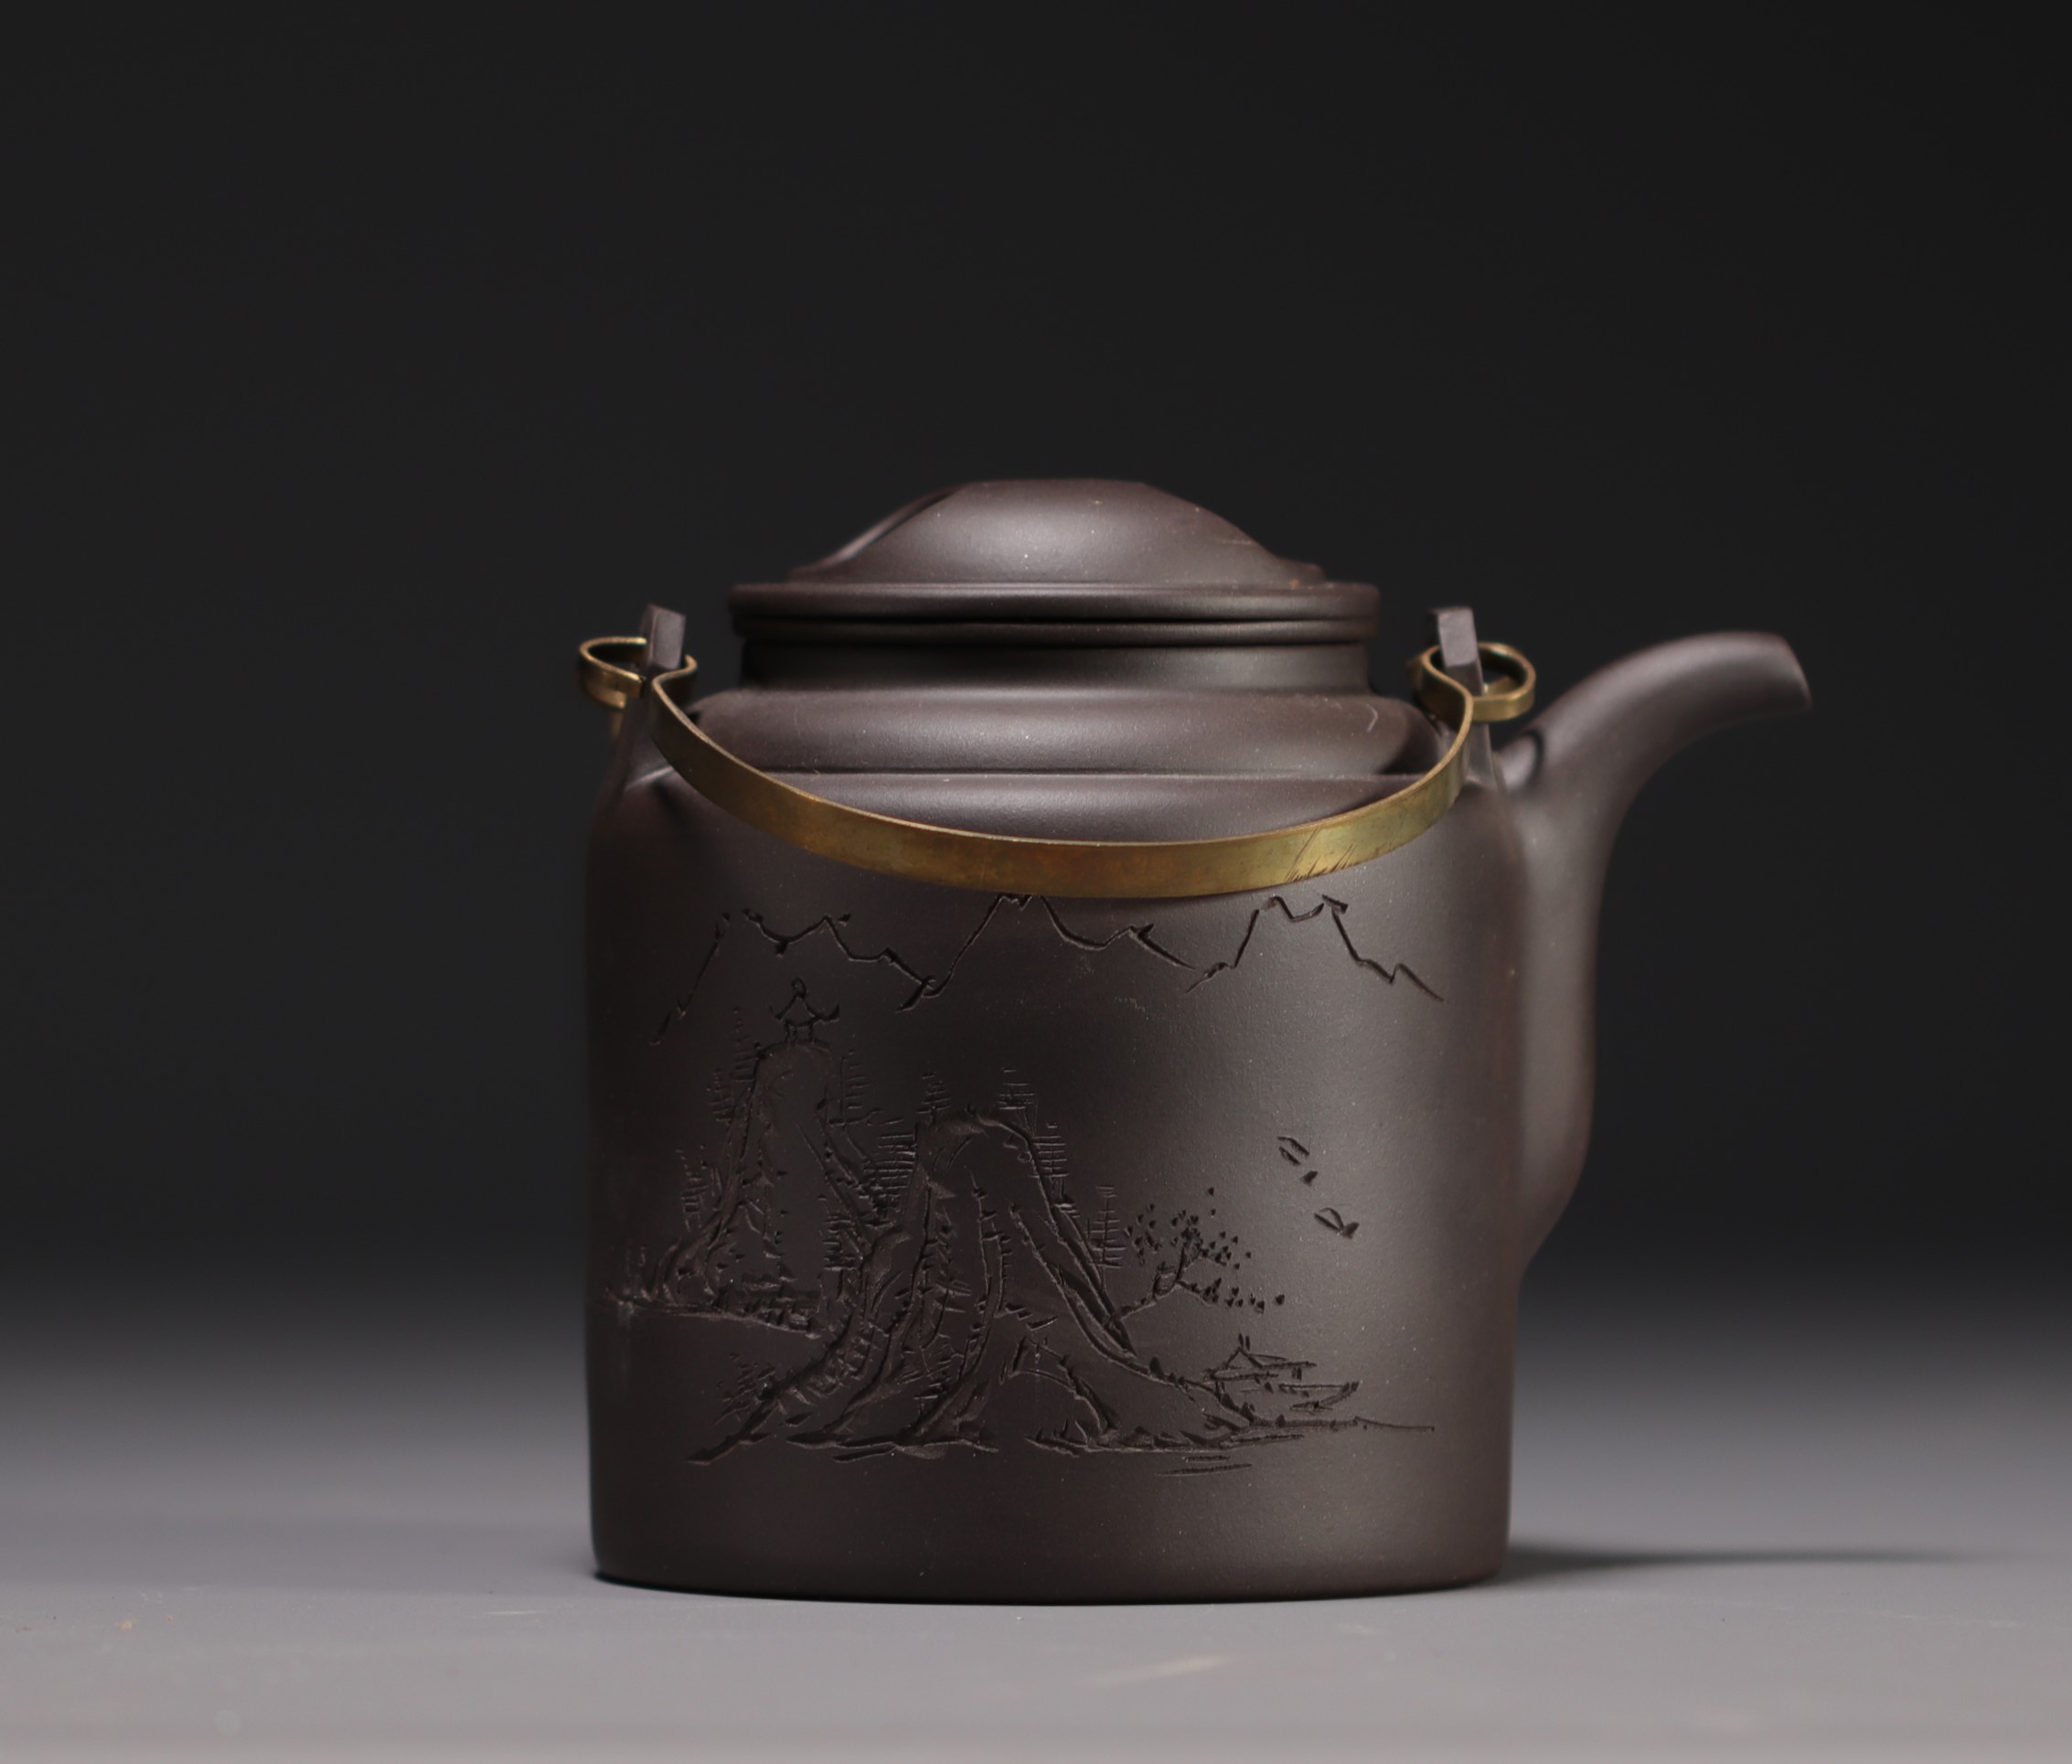 China - Yixing violet clay teapot in its box, 20th century. - Image 3 of 5